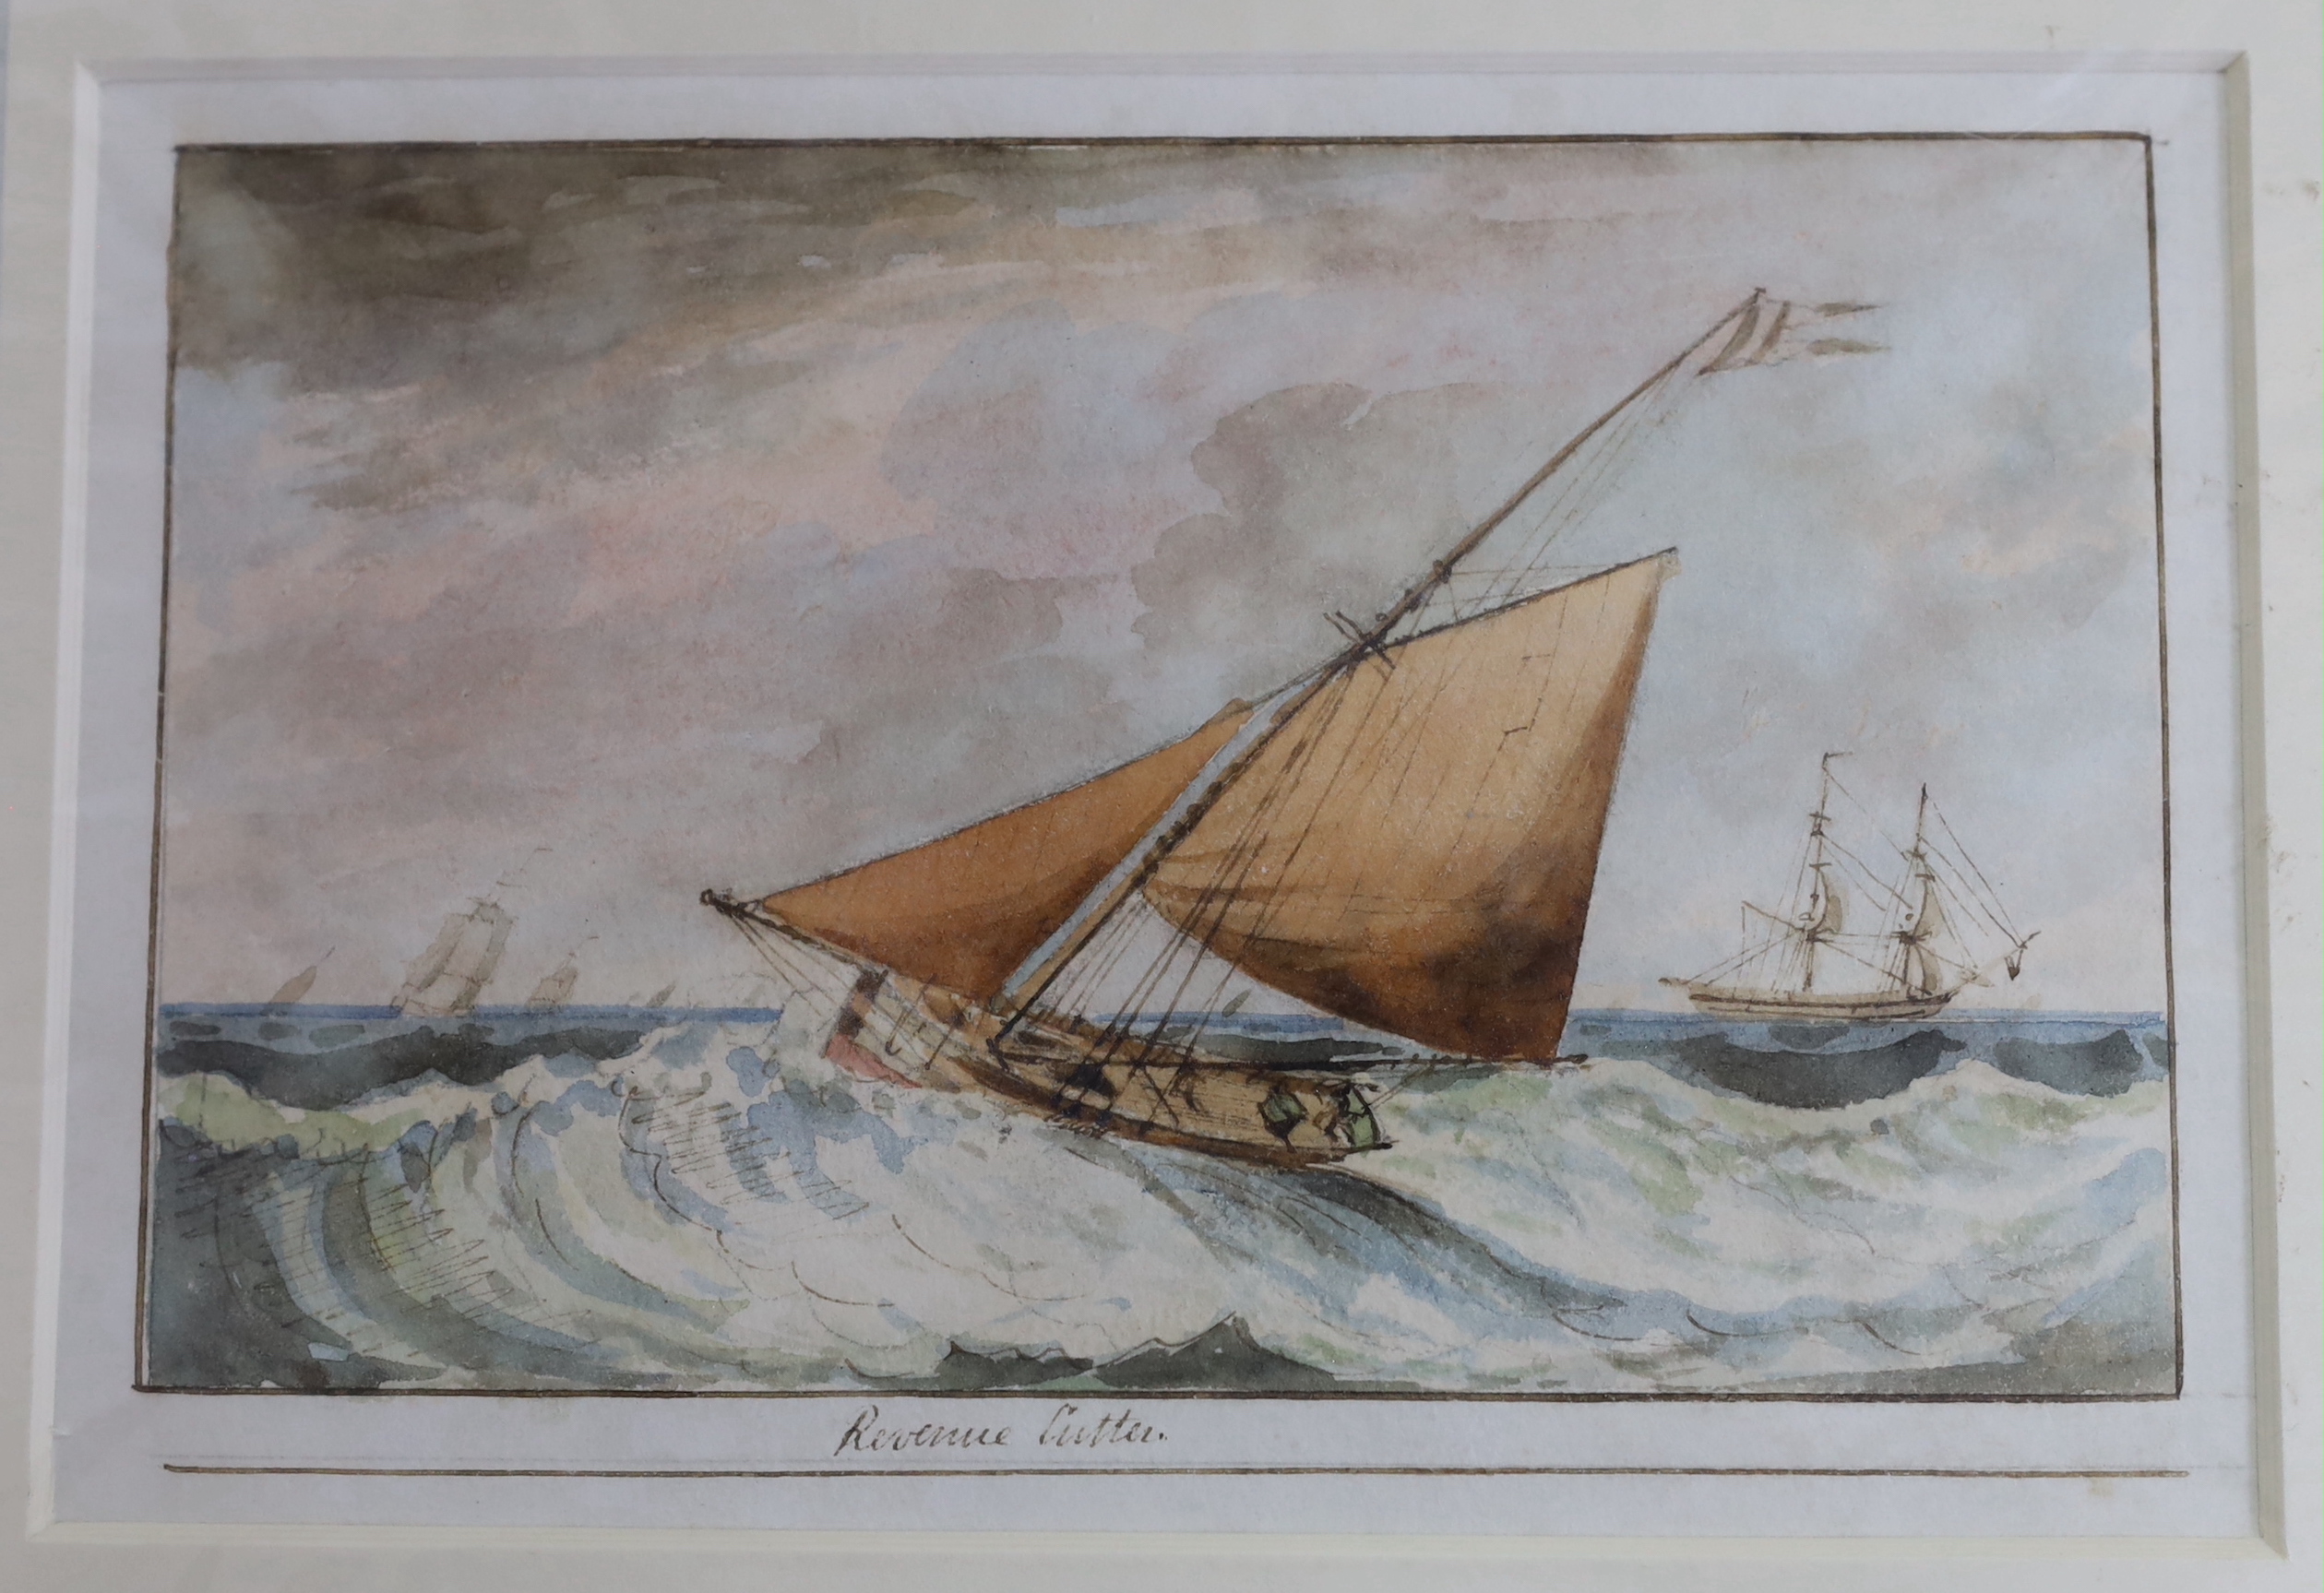 Lieutenant Edward Bampfylde Eagles (19th C.) set of three watercolours comprising, ‘Revenue Cutter’, ‘Near the Red House, Battersea’ & ‘American Schooner’, each inscribed, mounted, unframed, 10x17cm